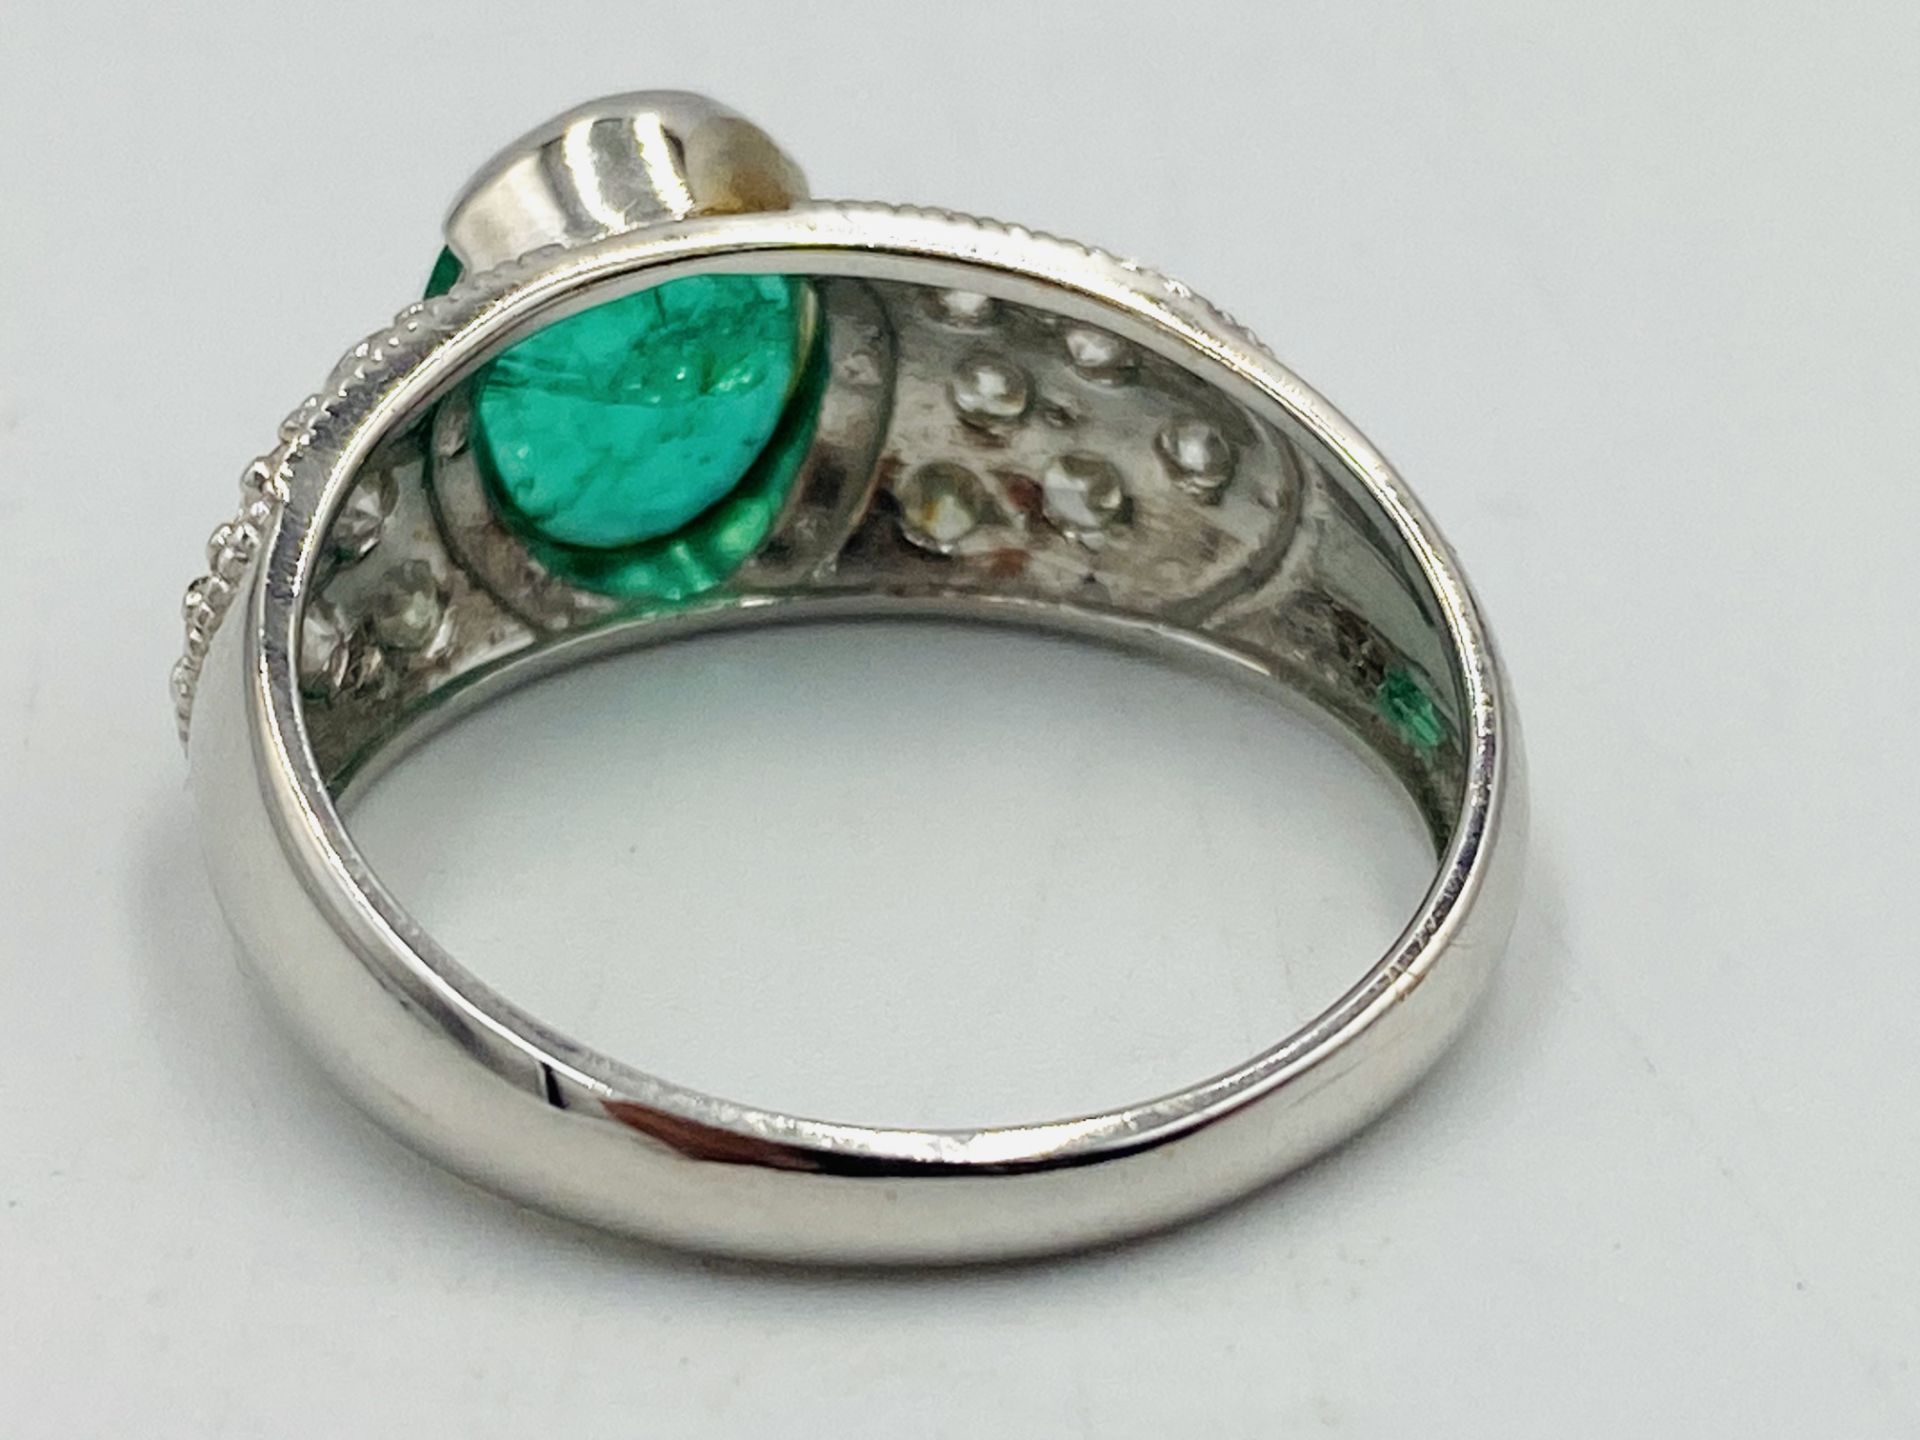 18ct white gold, diamond and emerald ring - Image 4 of 4